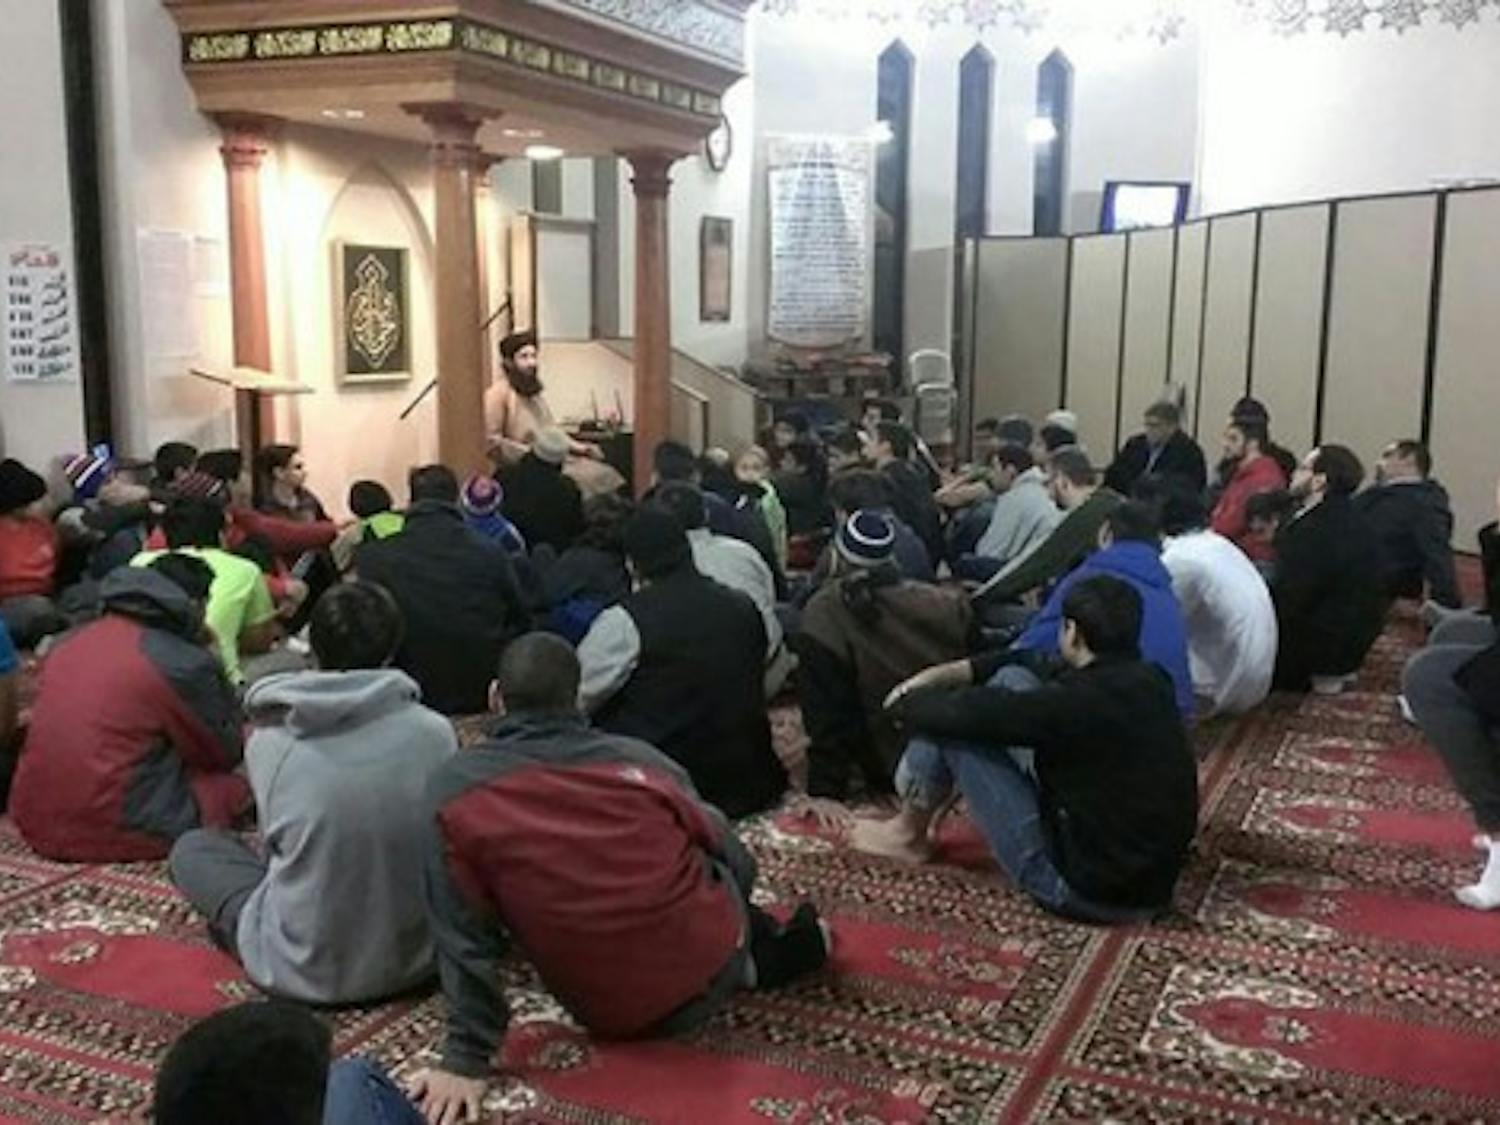 Students from UB&rsquo;s Muslim Student Association (MSA) gather at Masjid An-Noor mosque to connect with each other and the local Muslim community. For many Muslim students, Islam is not only a religion, but also a way of life.&nbsp;Courtesy of Abdel Rahman Alnaji